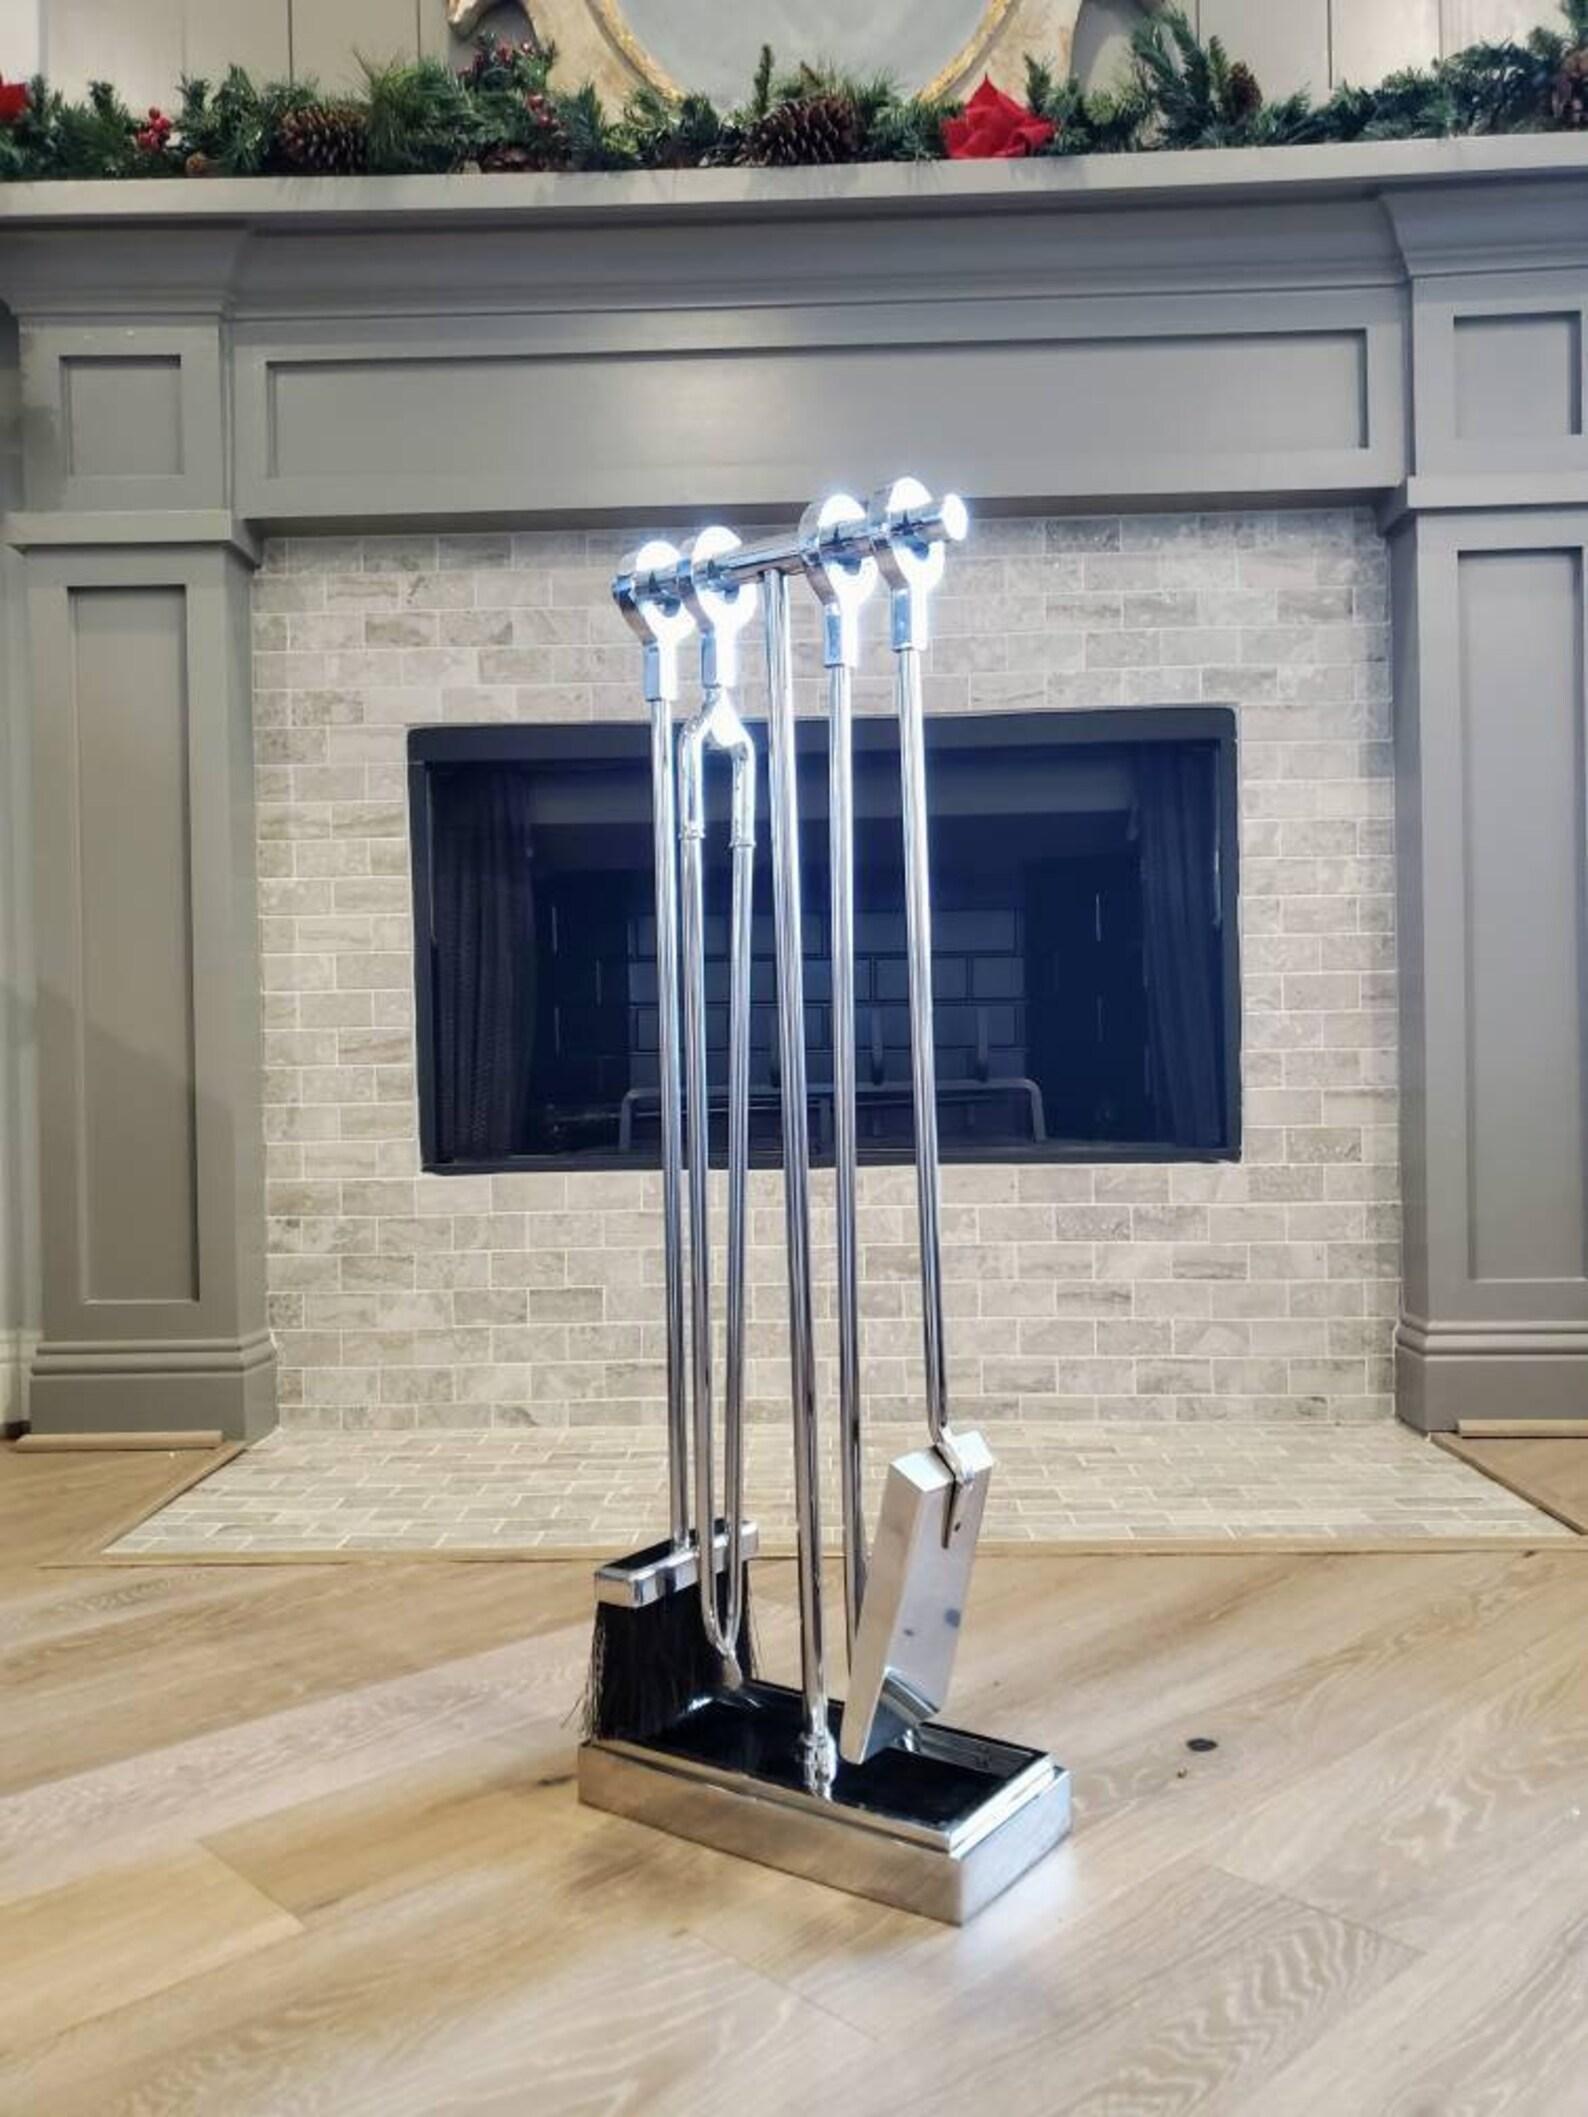 A stunning set of Post-Modern fireplace tools by Danny Alessandro. Bold, elegantly refined minimalist taste, artistic very fine quality cast fire tools with ring handles in chromed nickeled steel, comprising four implements each with a circular